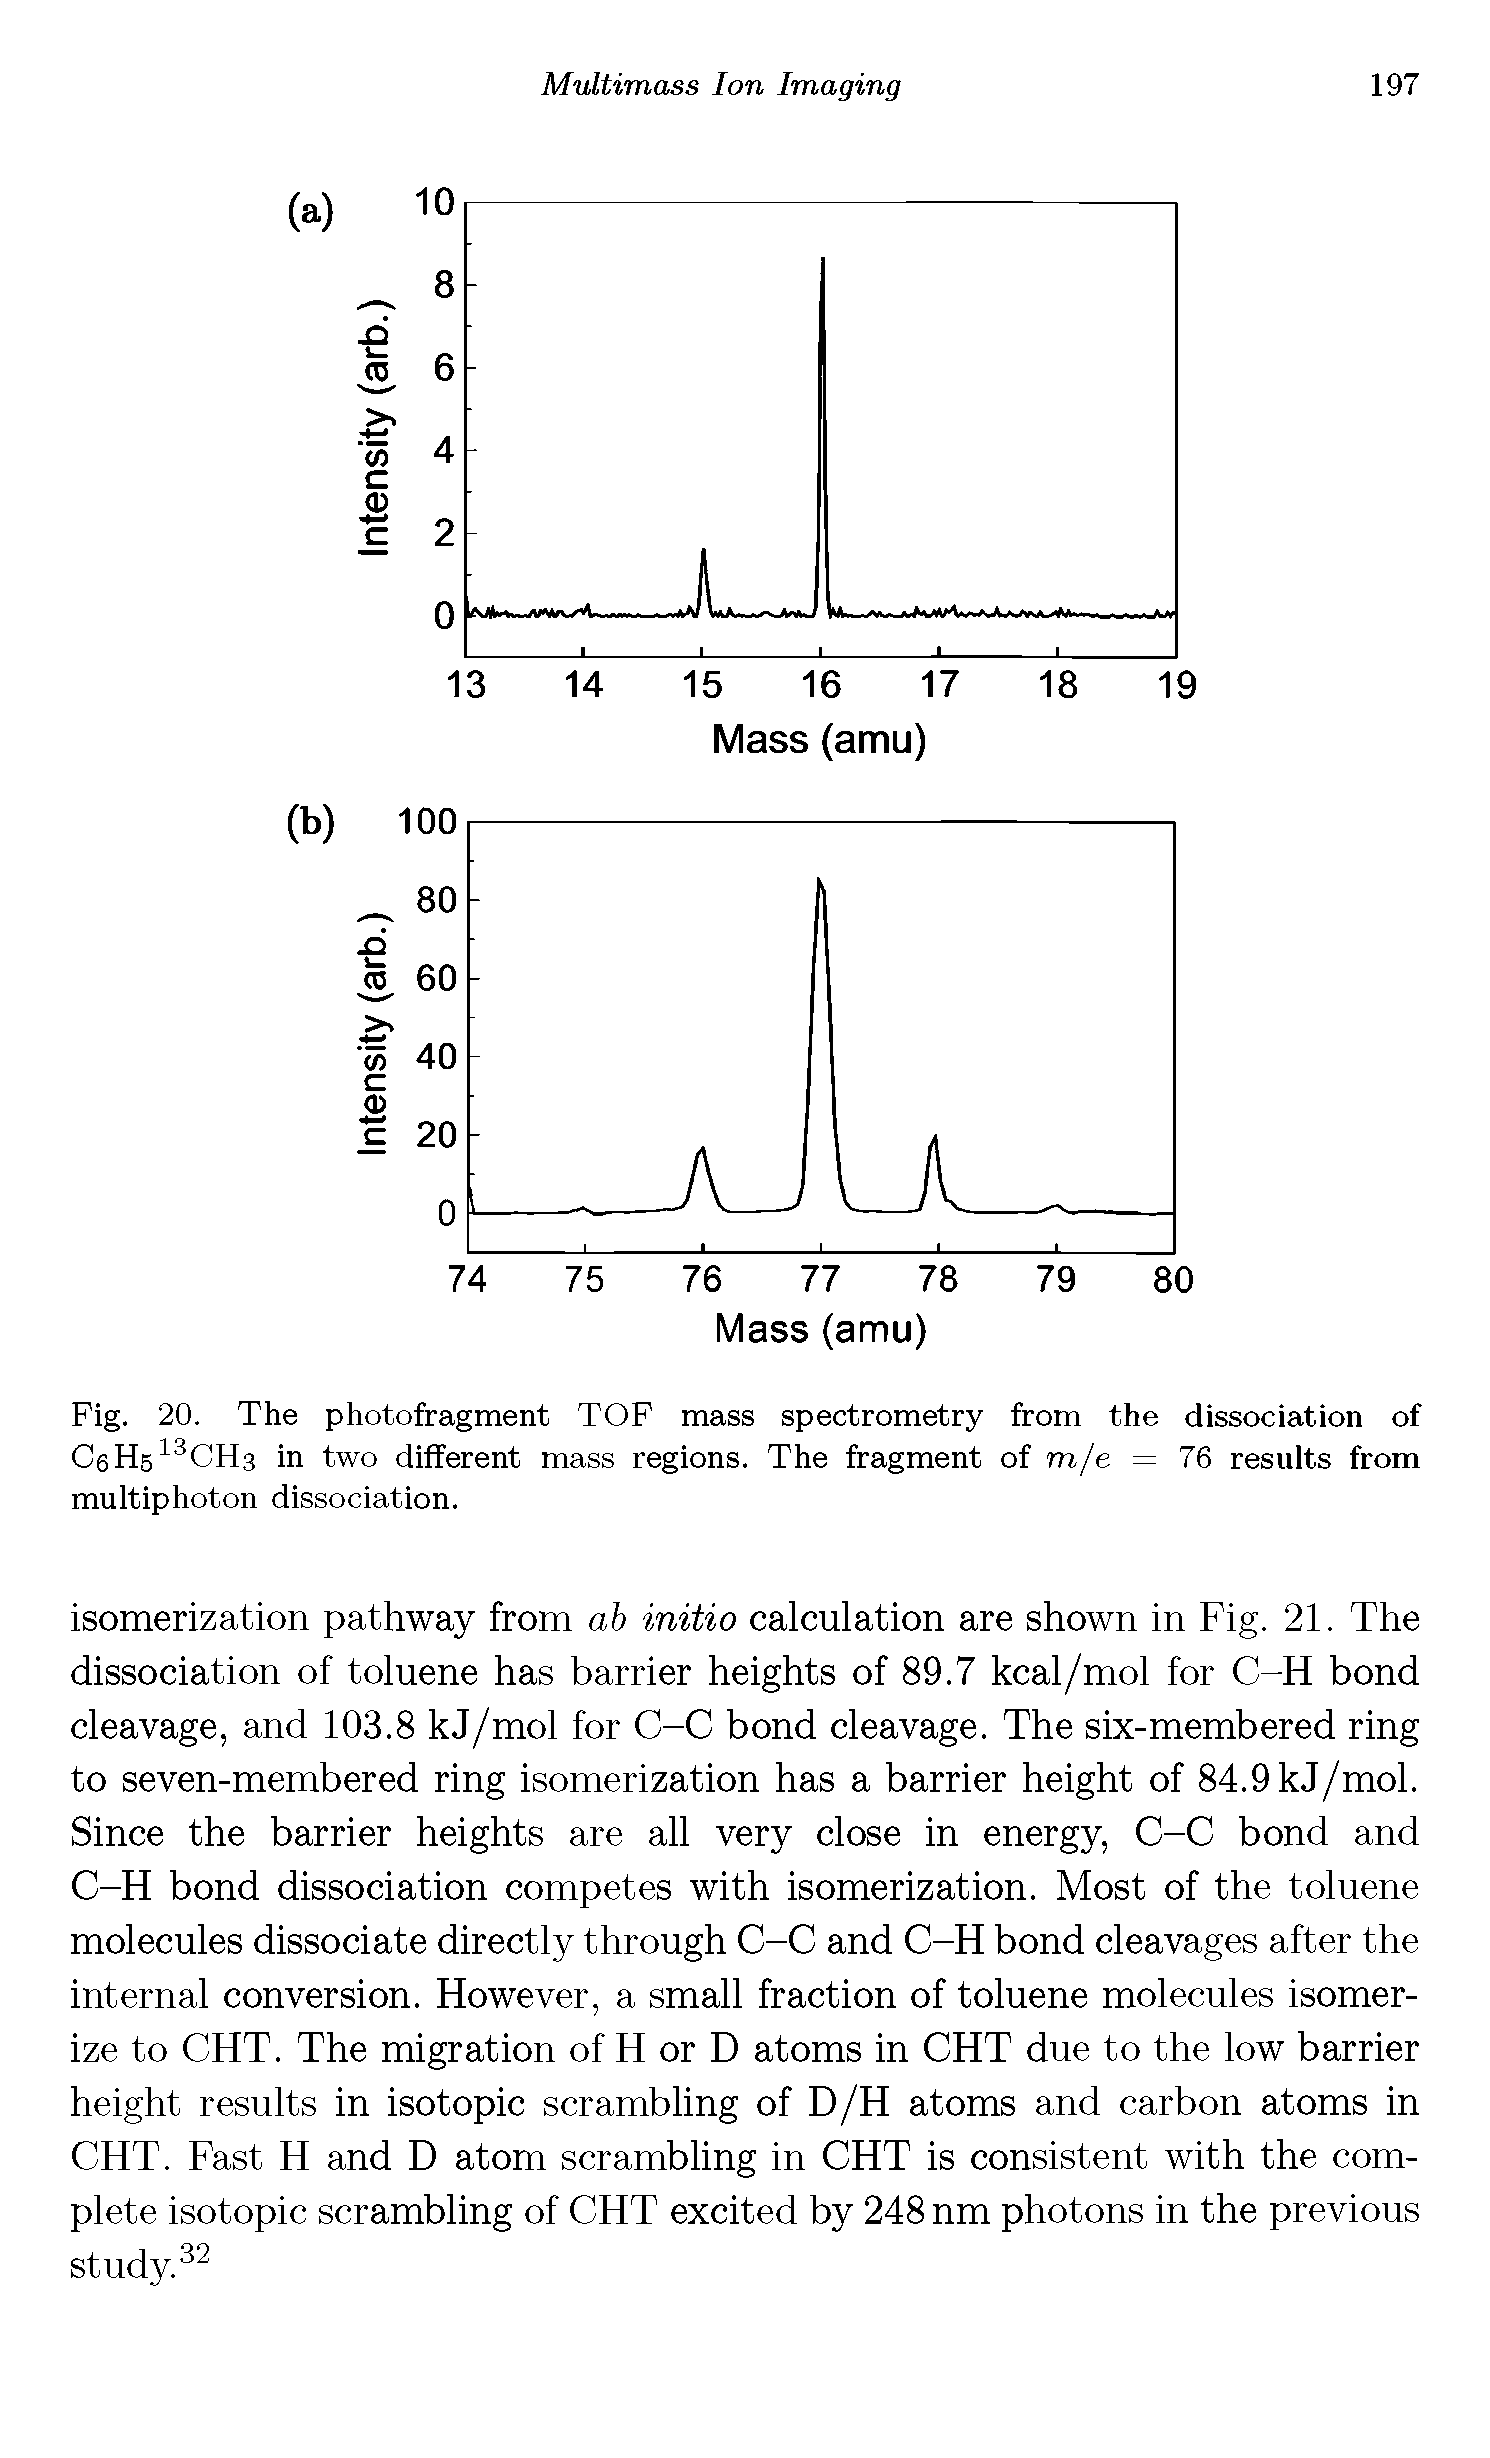 Fig. 20. The photofragment TOF mass spectrometry from the dissociation of C6Hb13CH3 in two different mass regions. The fragment of m/e = 76 results from multiphoton dissociation.